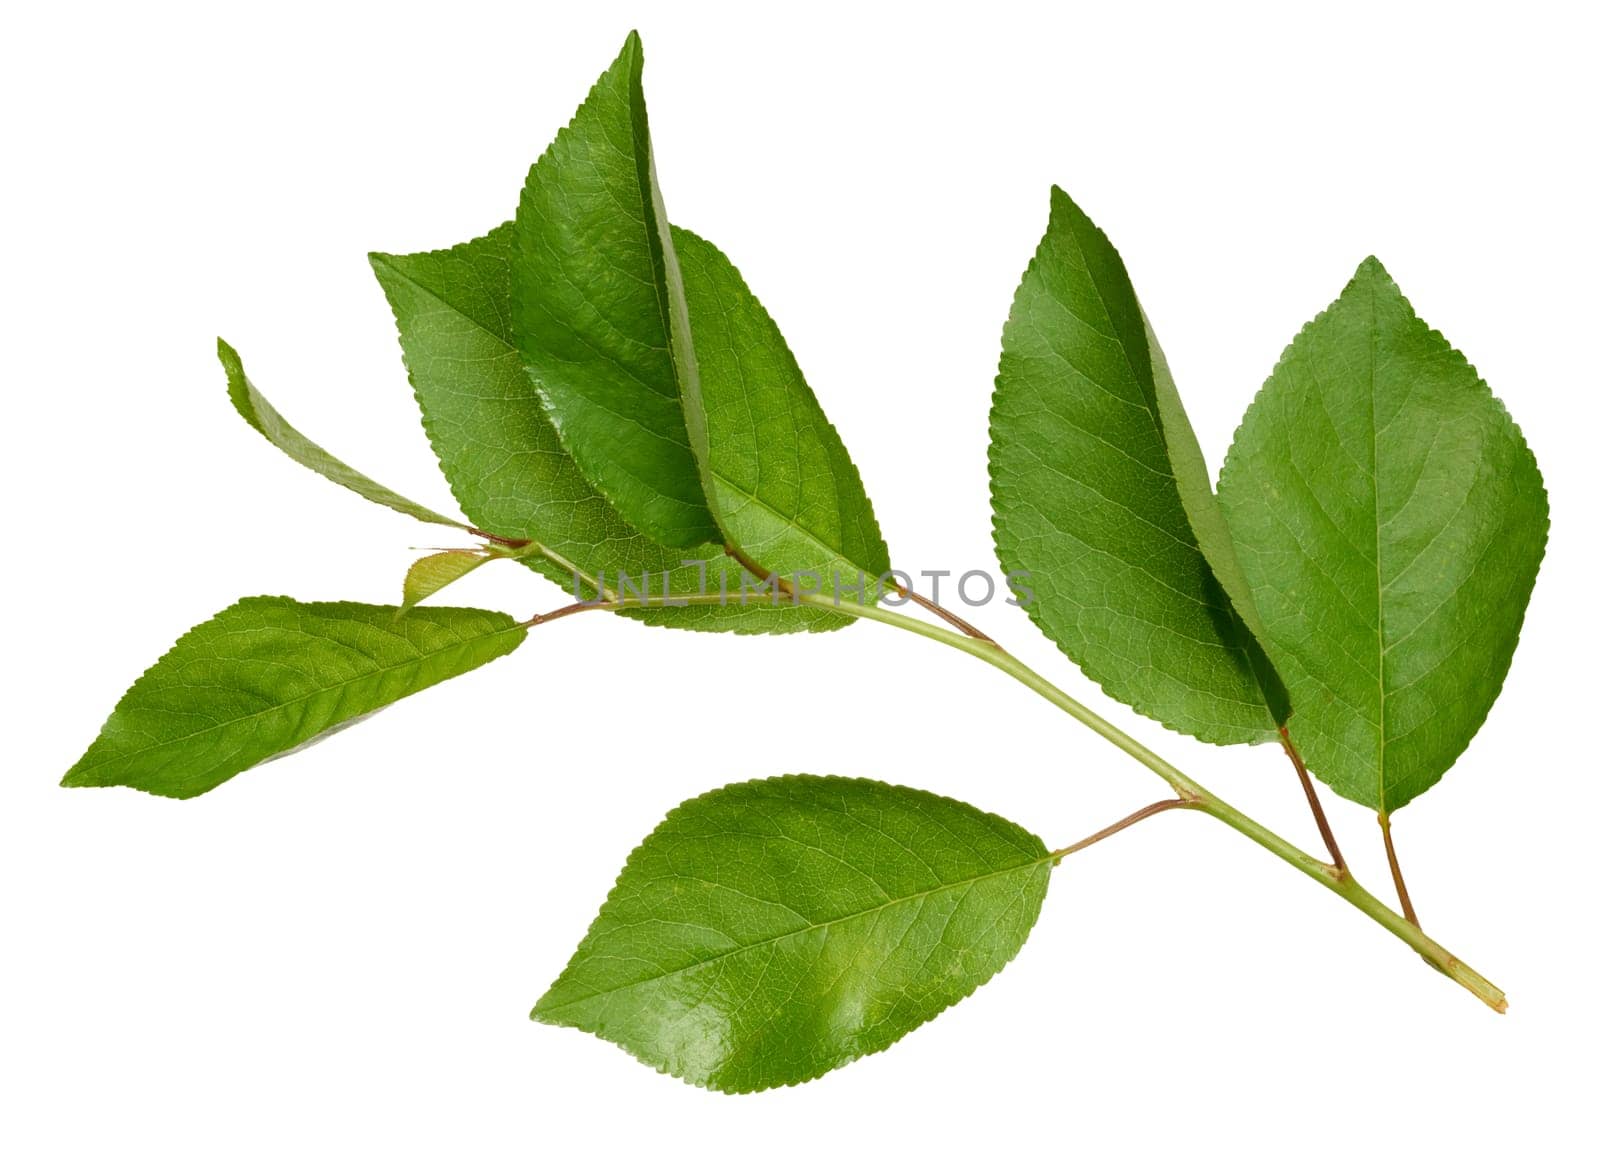 Cherry tree branch with green leaves on isolated background